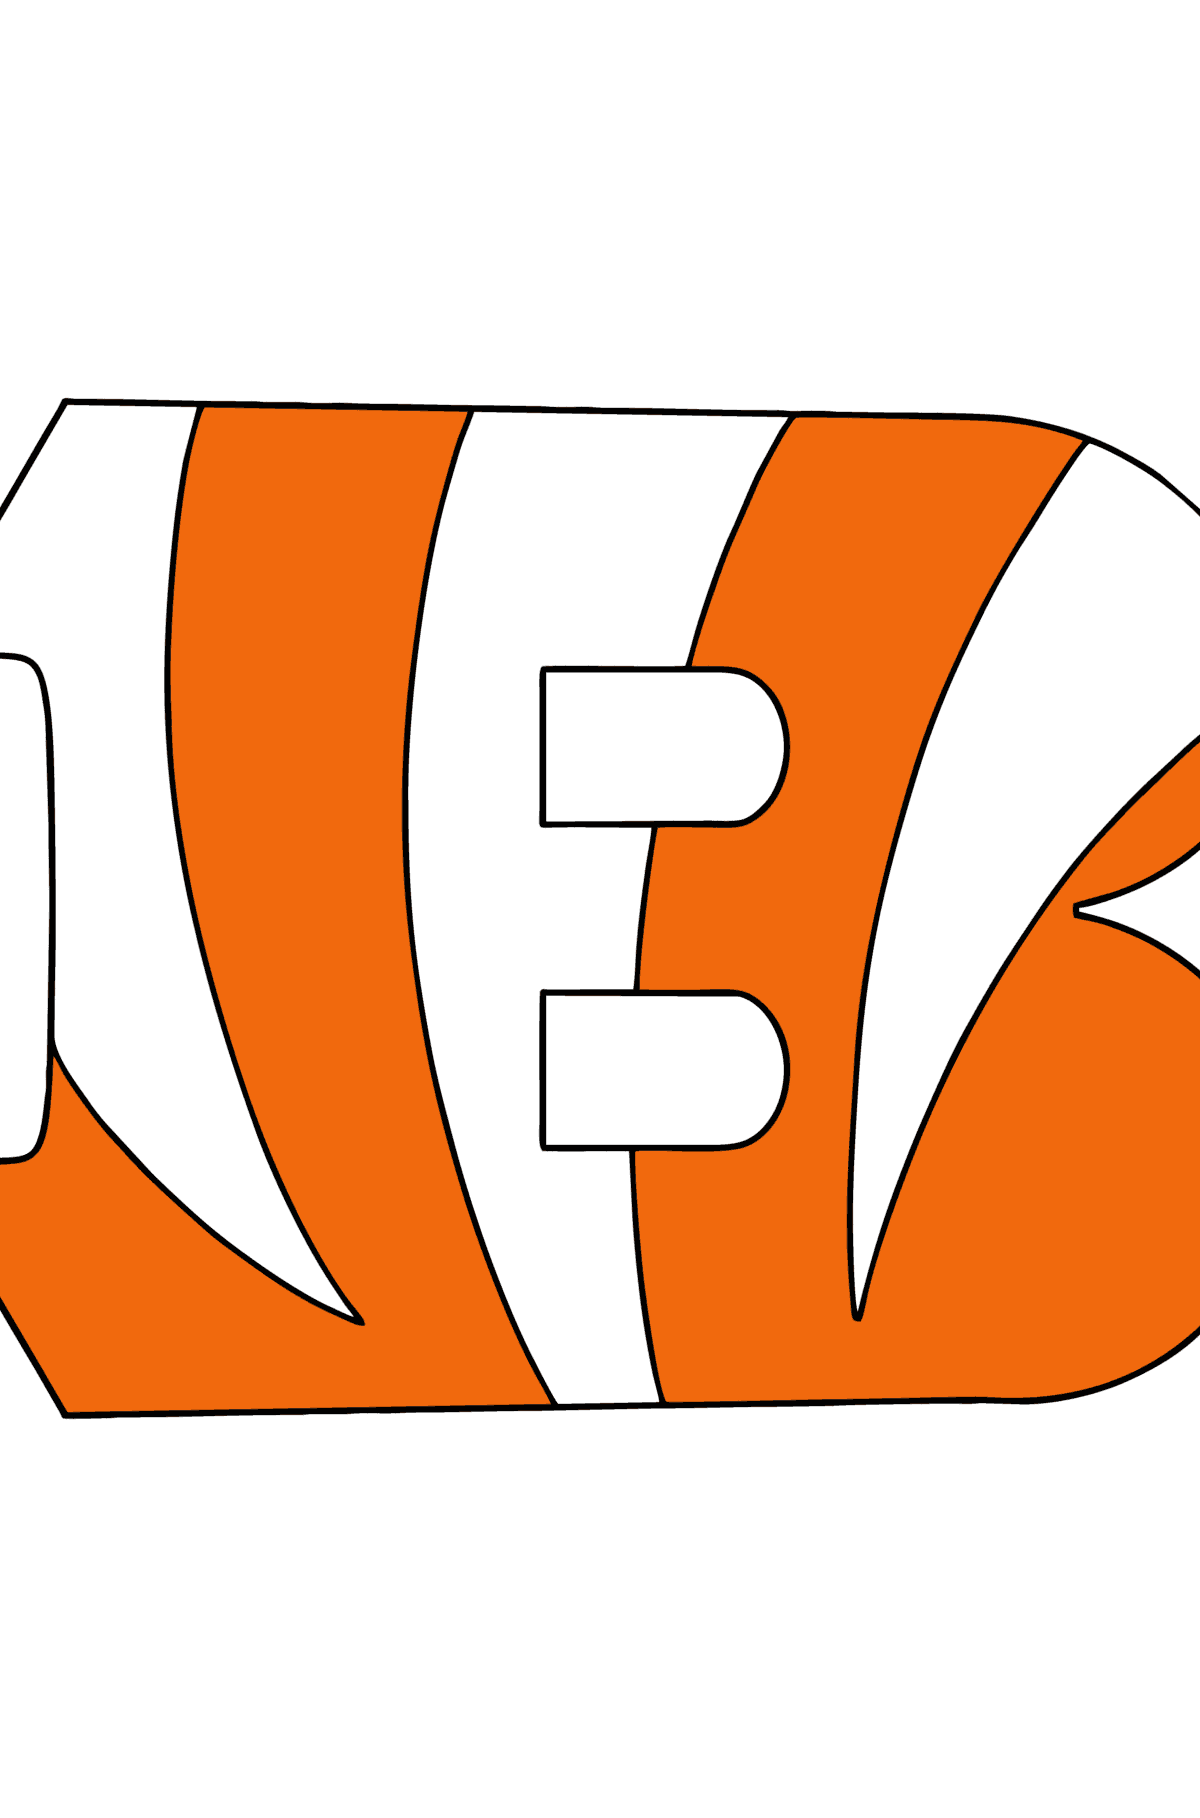 NFL Cincinnati Bengals сoloring page - Coloring Pages for Kids